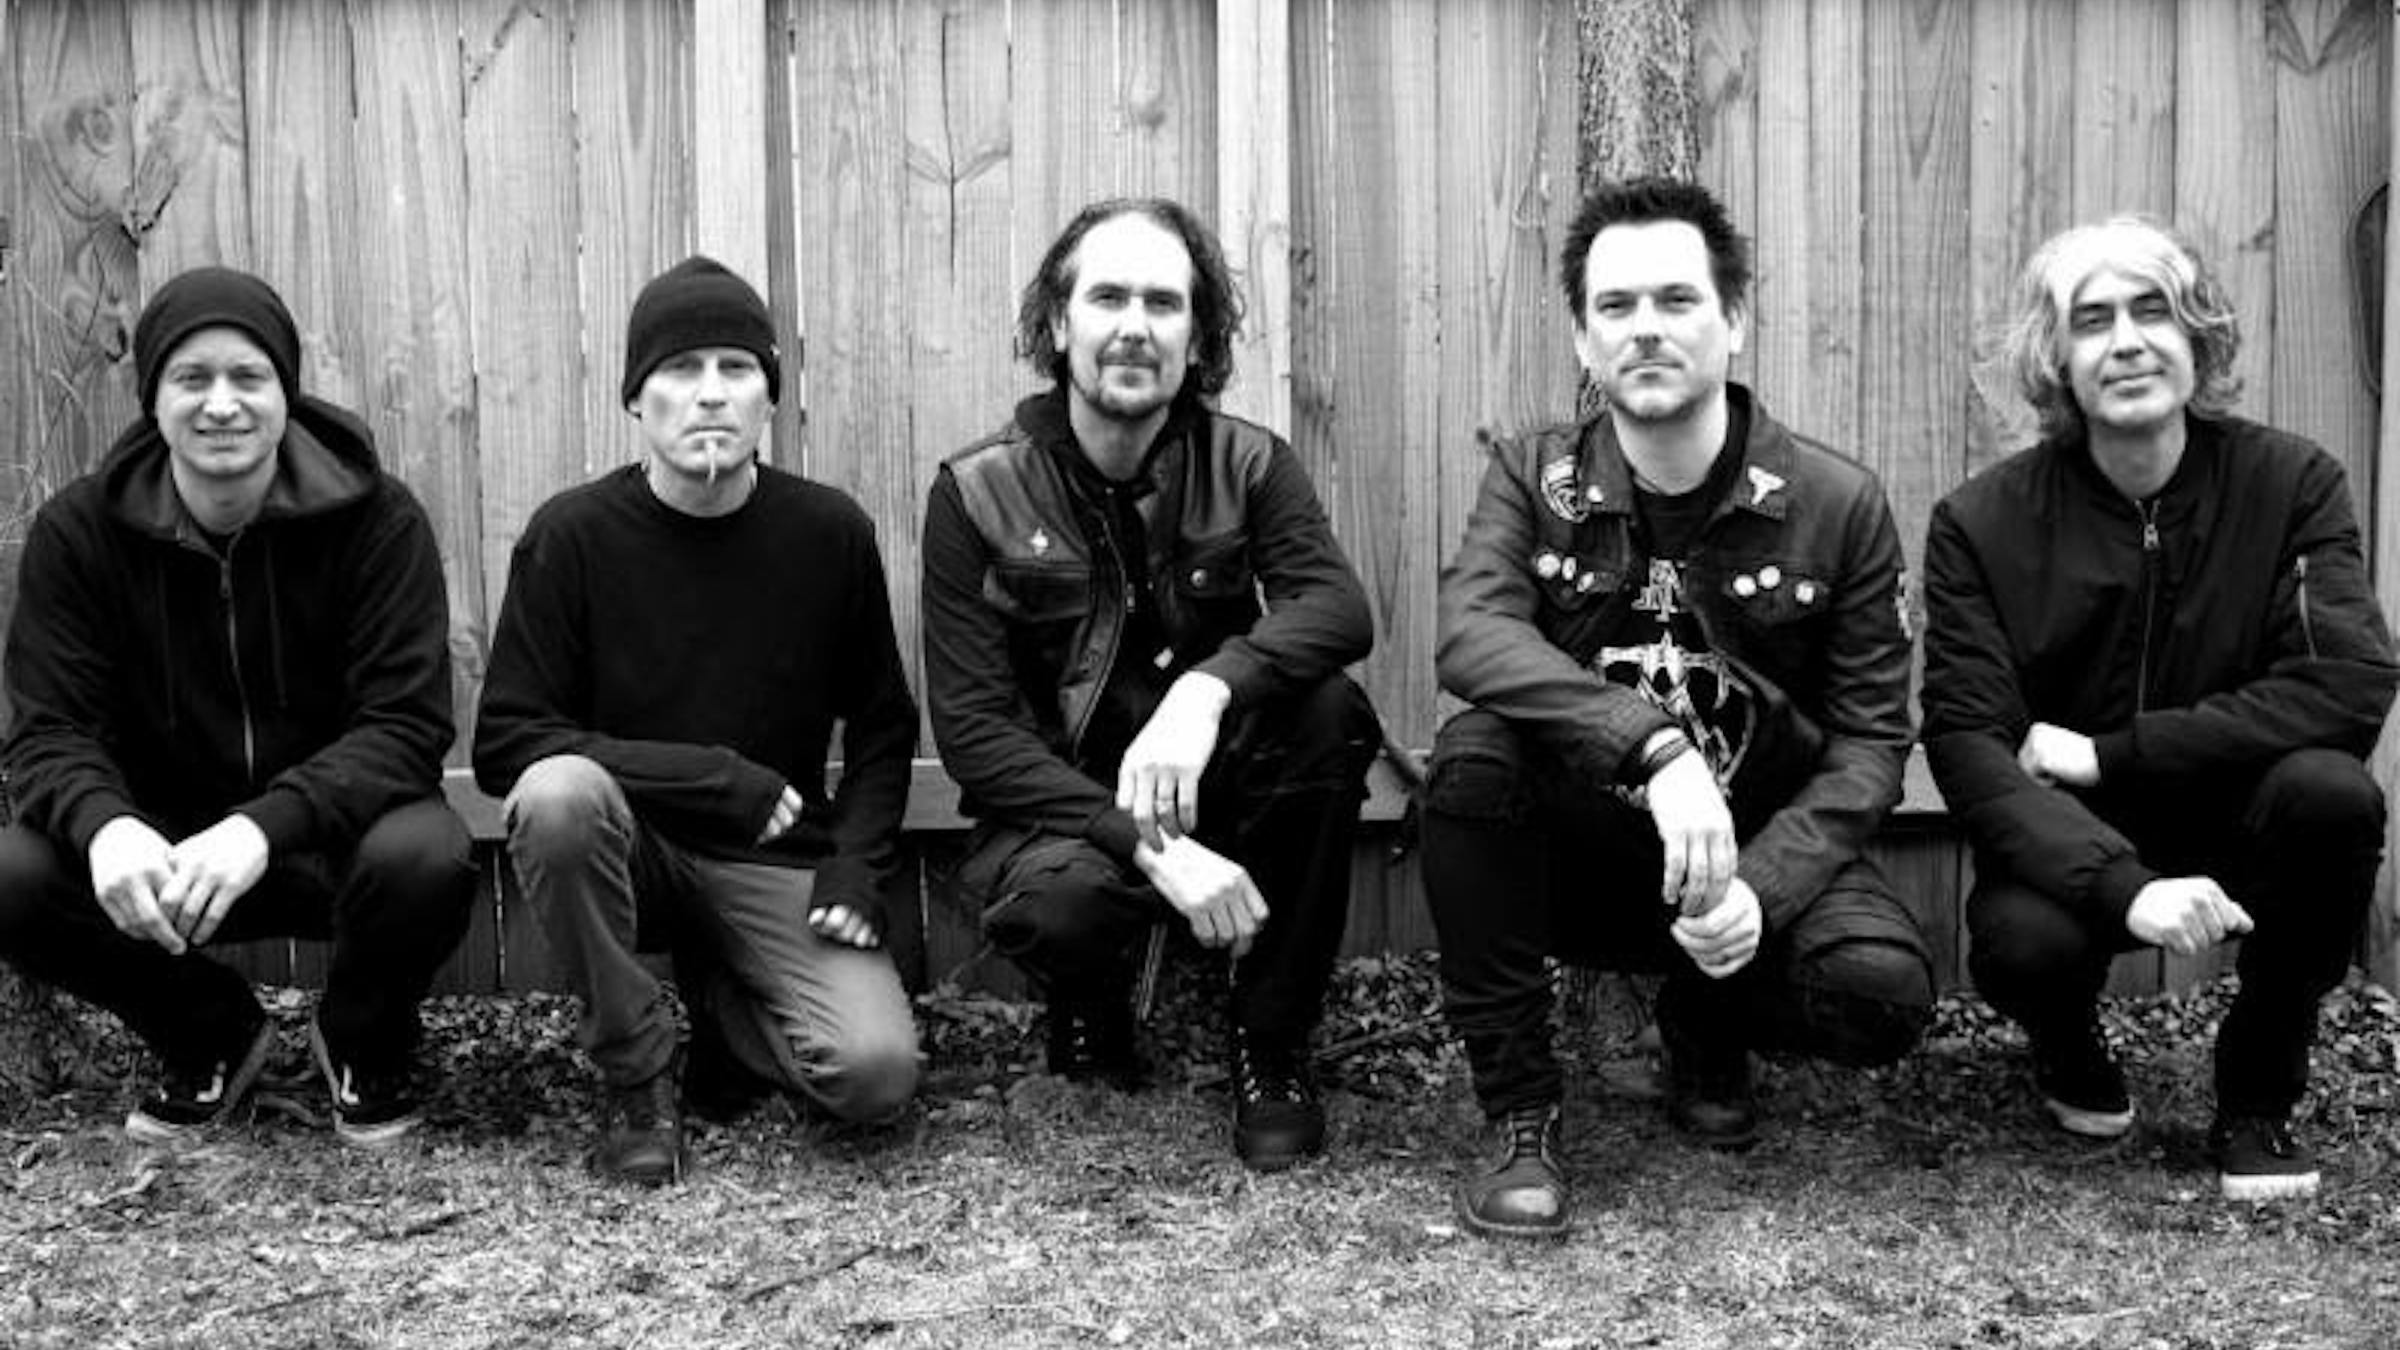 Tau Cross Dropped By Relapse Records For Thanking Holocaust Denier In Liner Notes